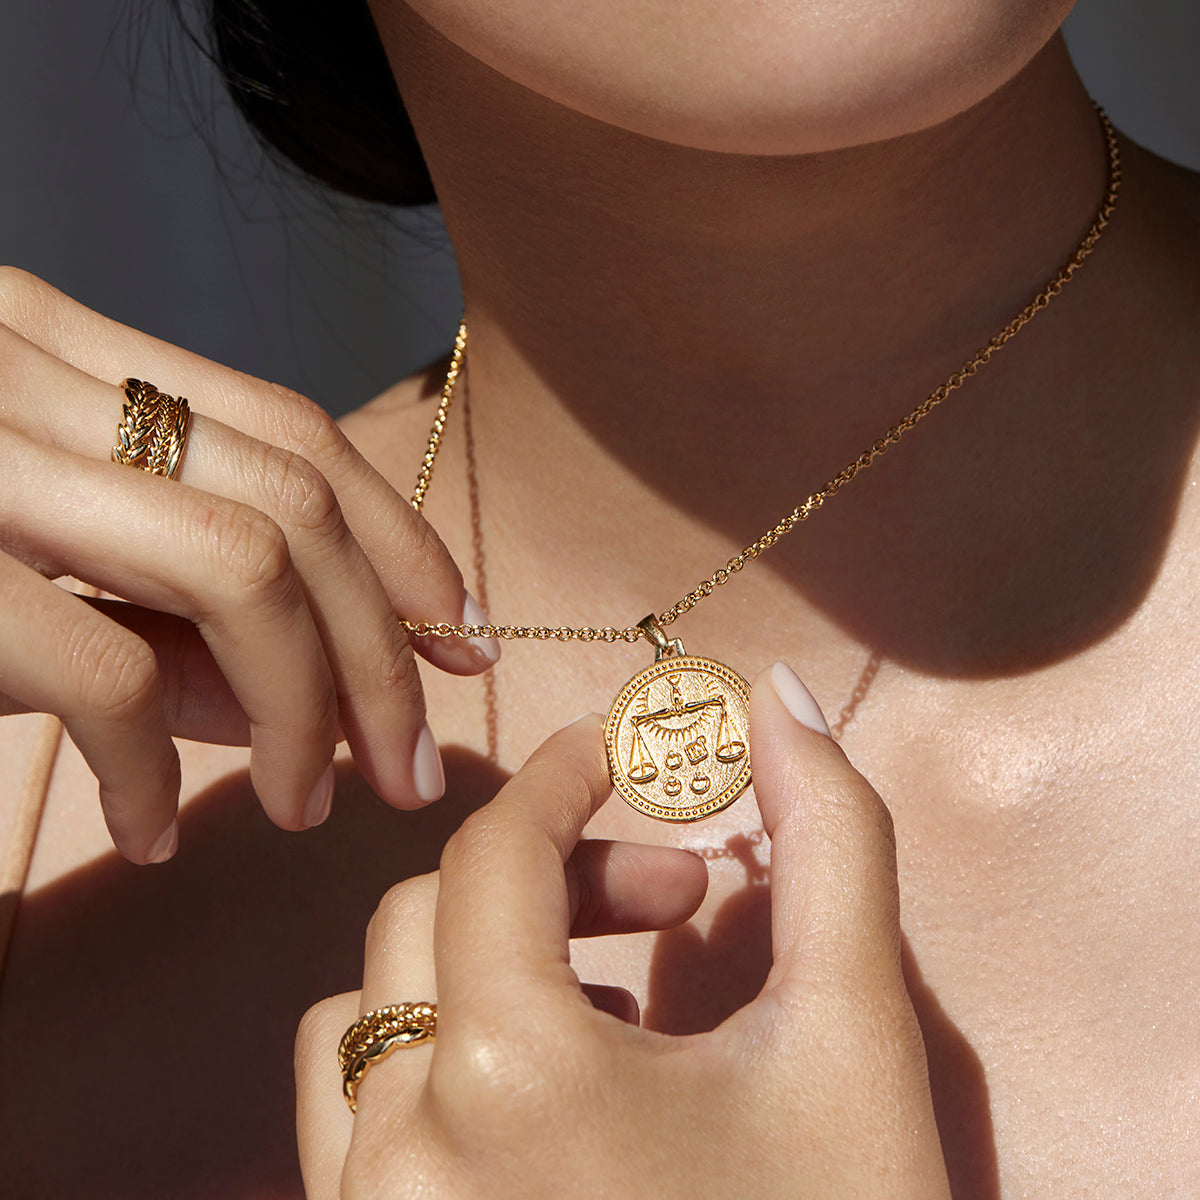 Close Up Woman Wearing Ethical Gold Libra Pendant Necklace, Holding the Pendant Between Her Thumb and Forefinger